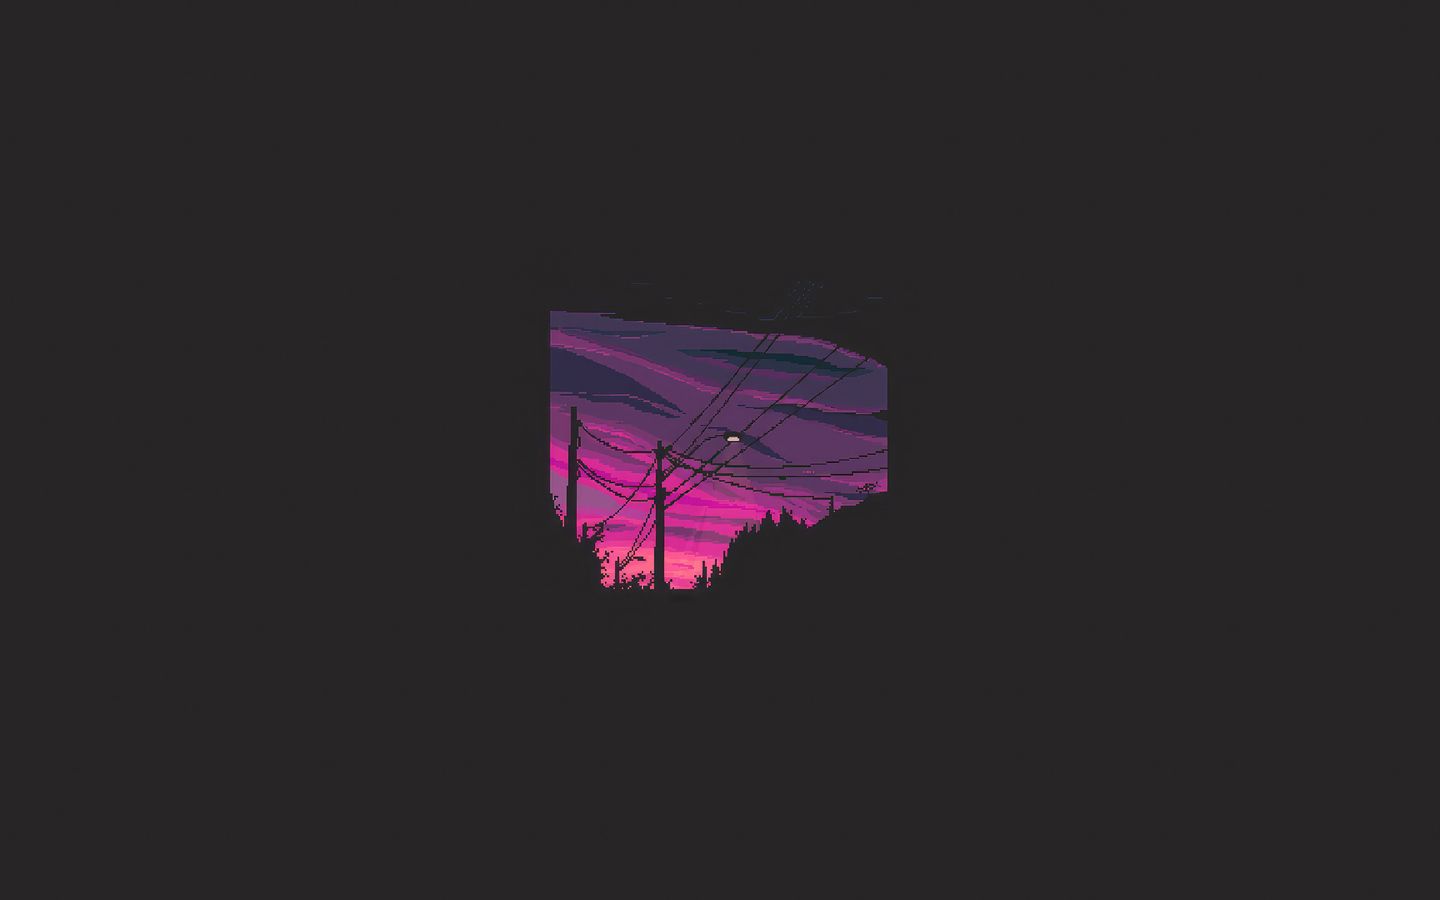 A pink and purple sunset with power lines in the foreground - Pixel art